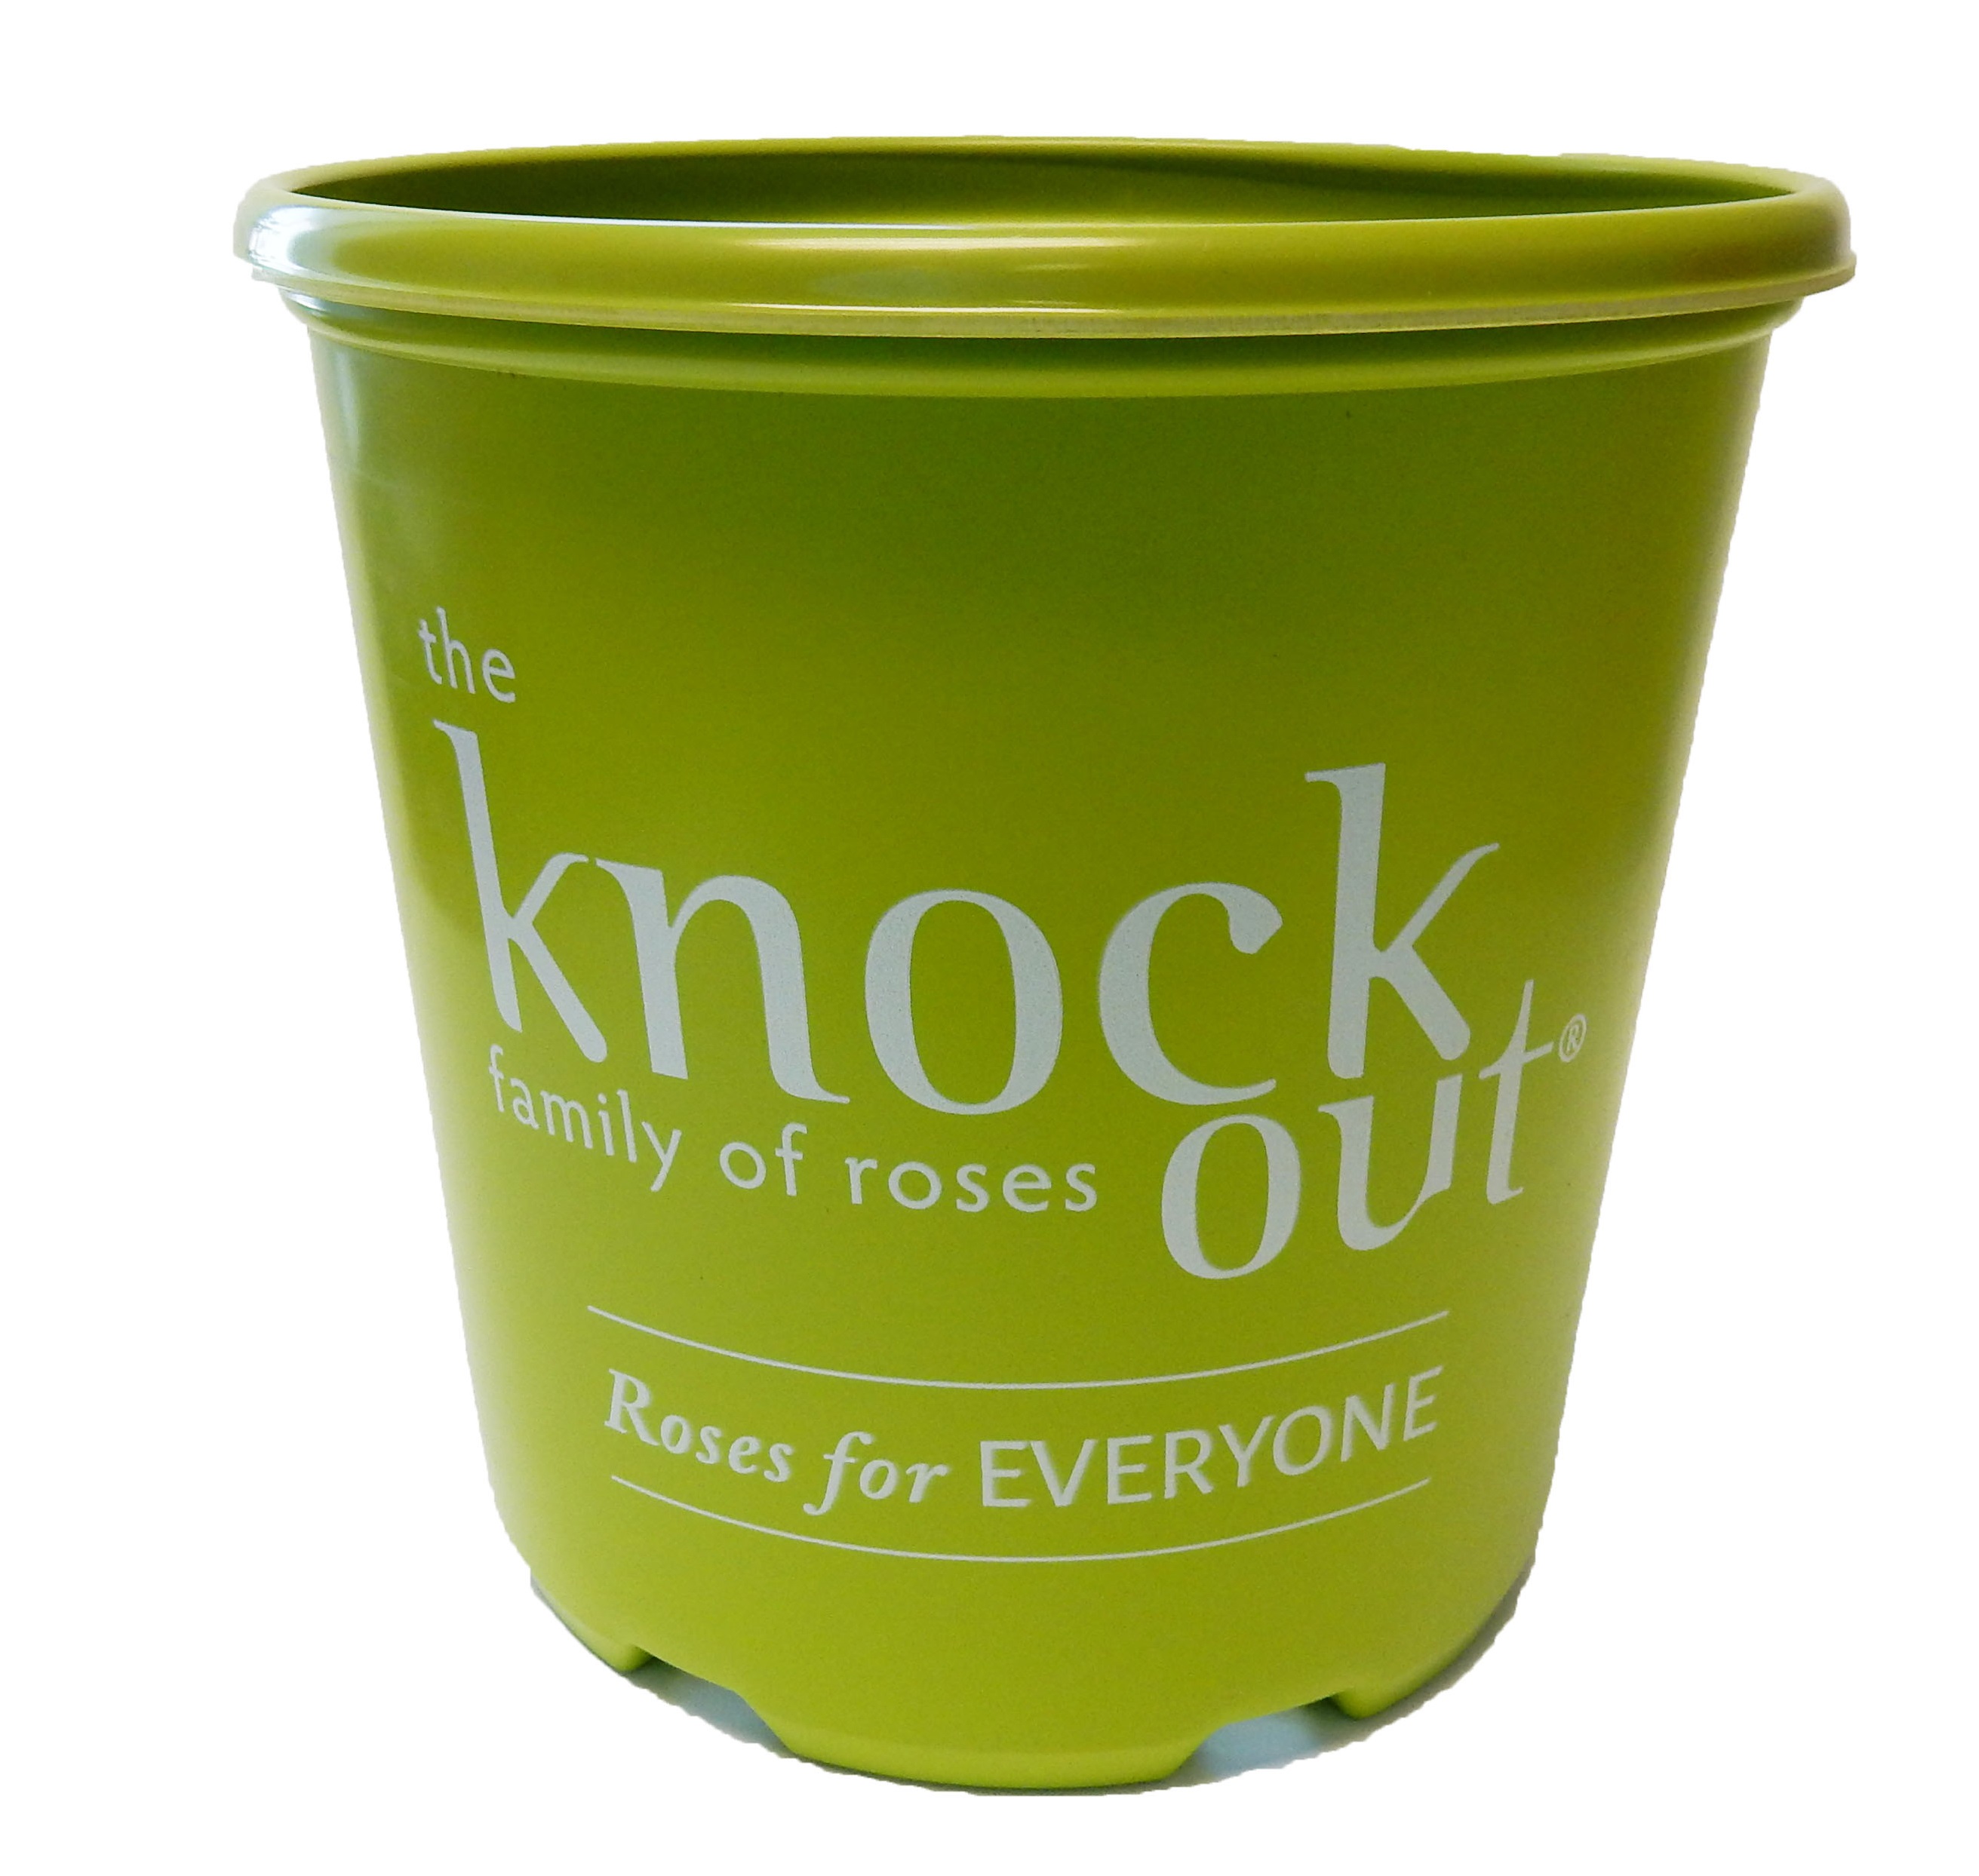 3.00 Gallon Knockout Rose Thermoformed Nursery Pot 44/cs - Nursery Containers